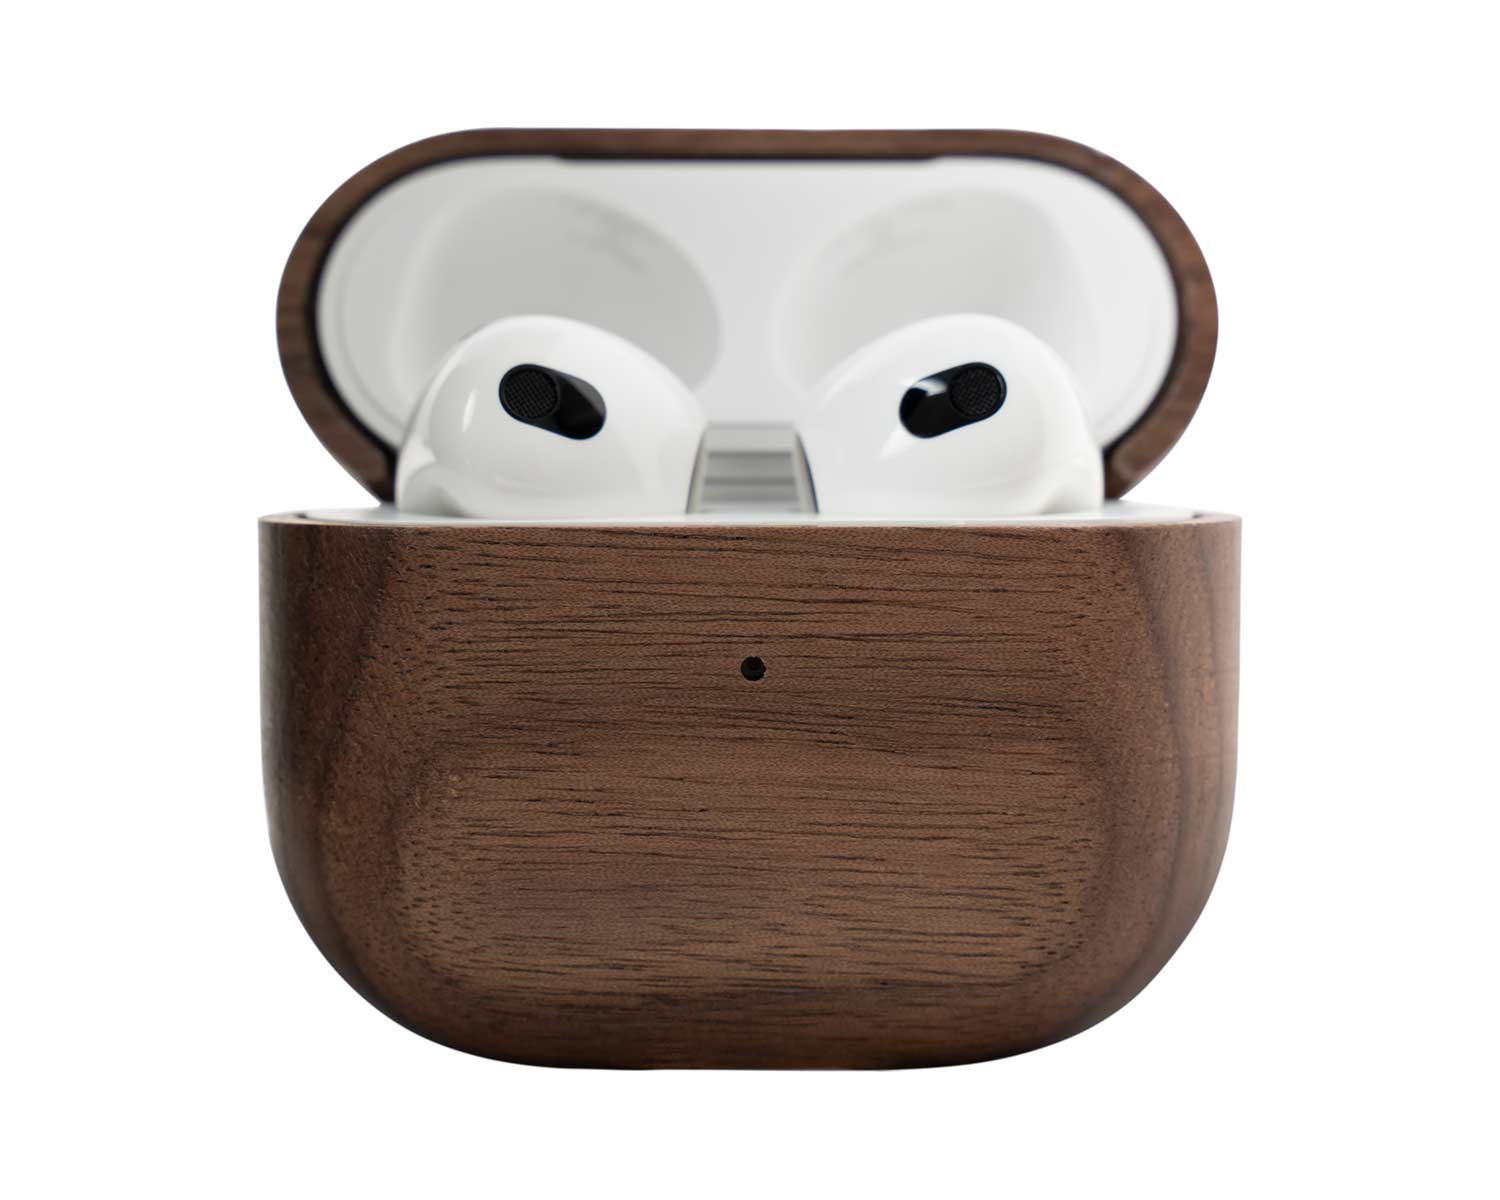 walnut wooden AirPods case with AirPods opened front view